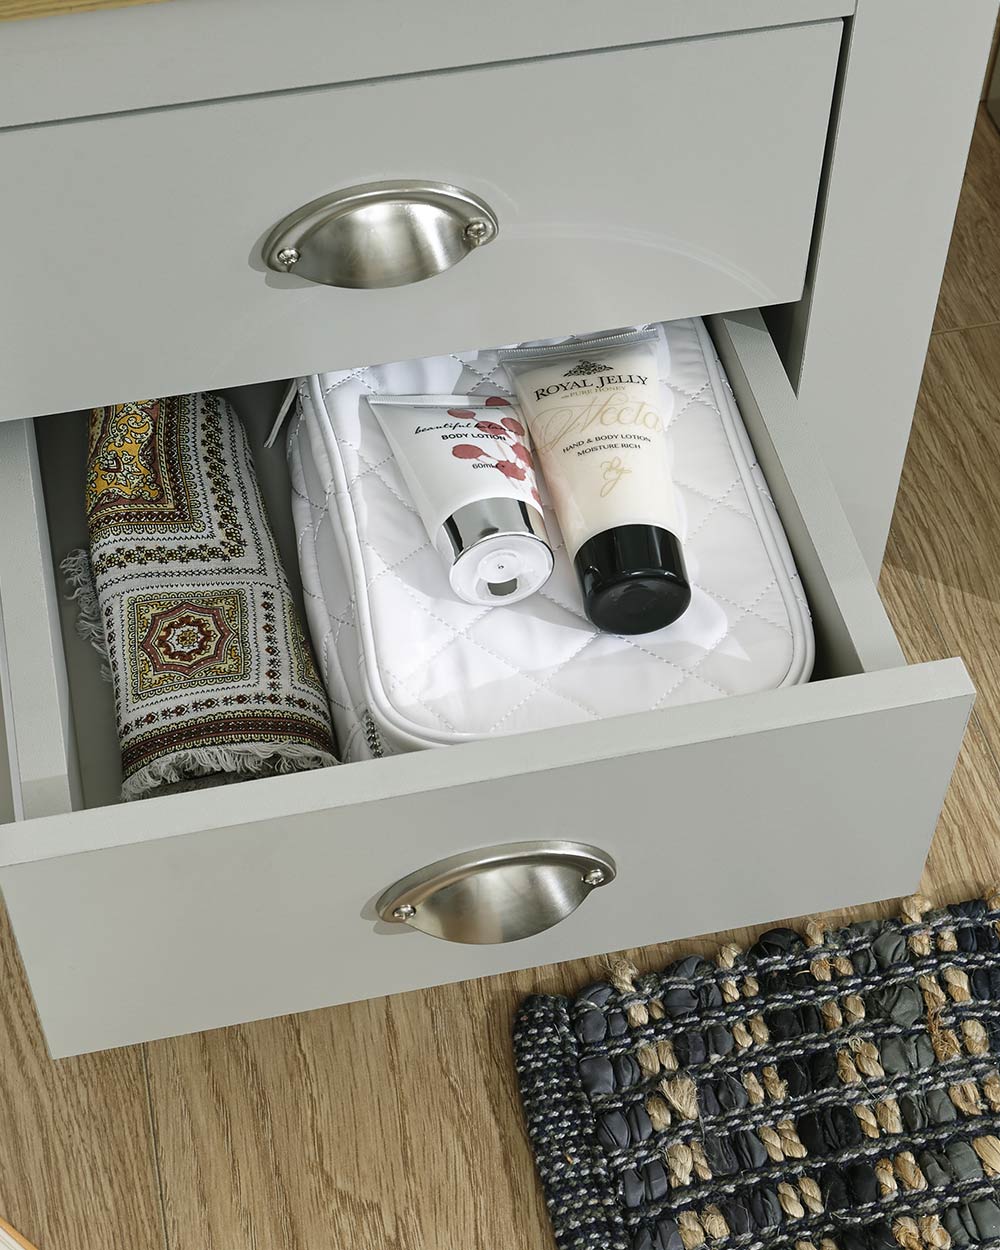 Lancaster 2 drawer bedside table cabinet in a lifestyle scene in a bedroom close up of the drawer with displayed items